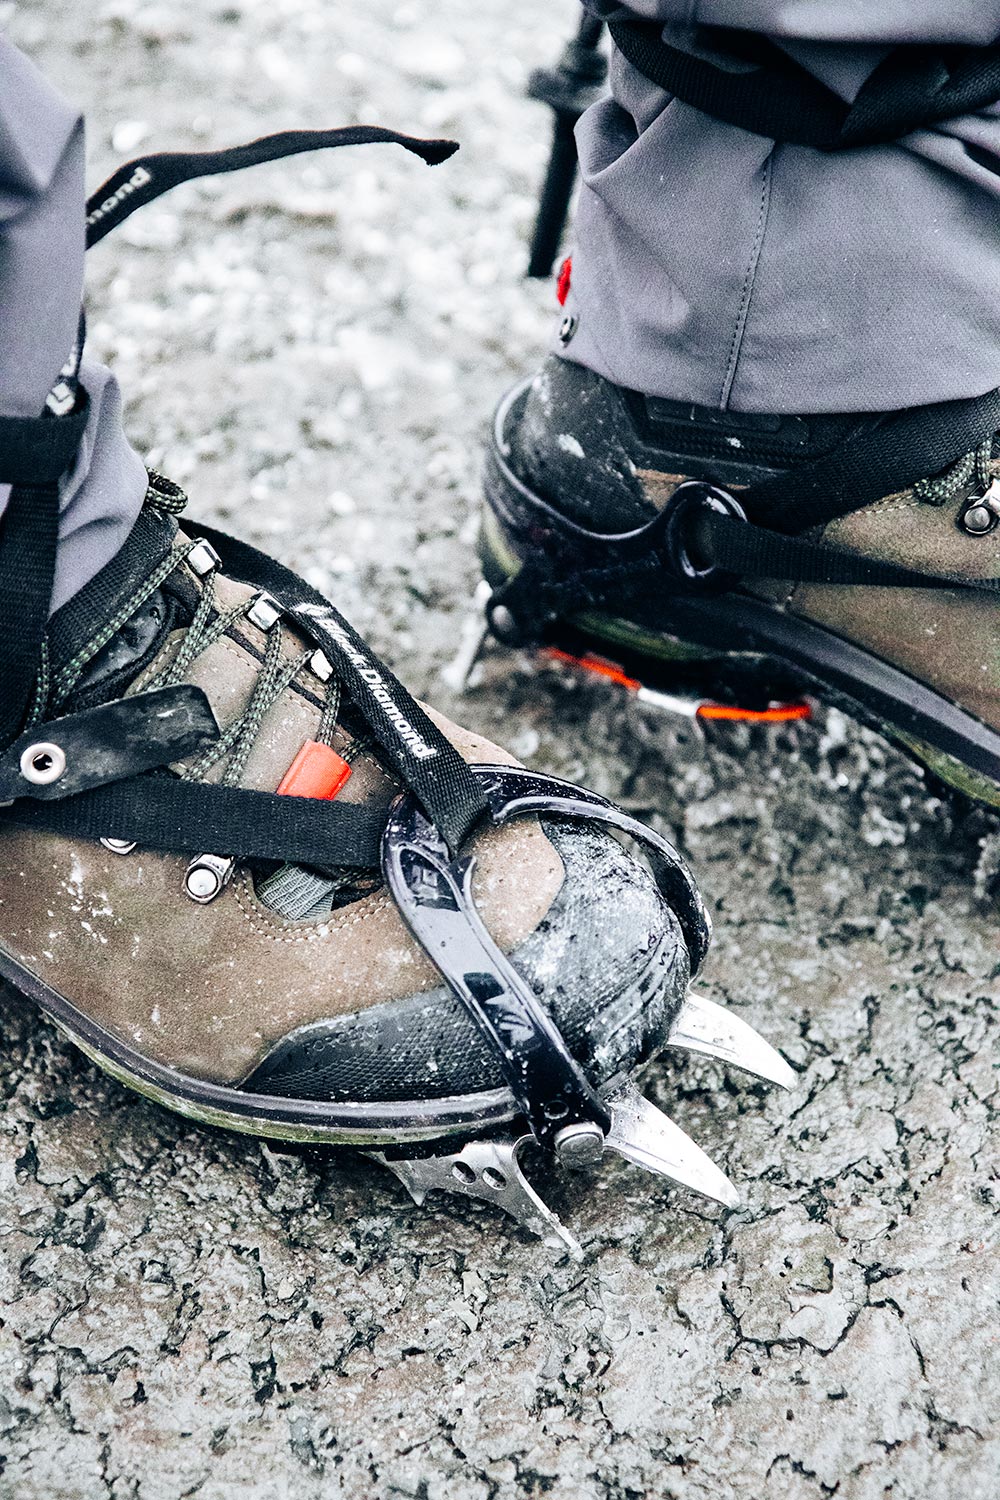 High hiking boots are needed to attach crampons for hiking on ice